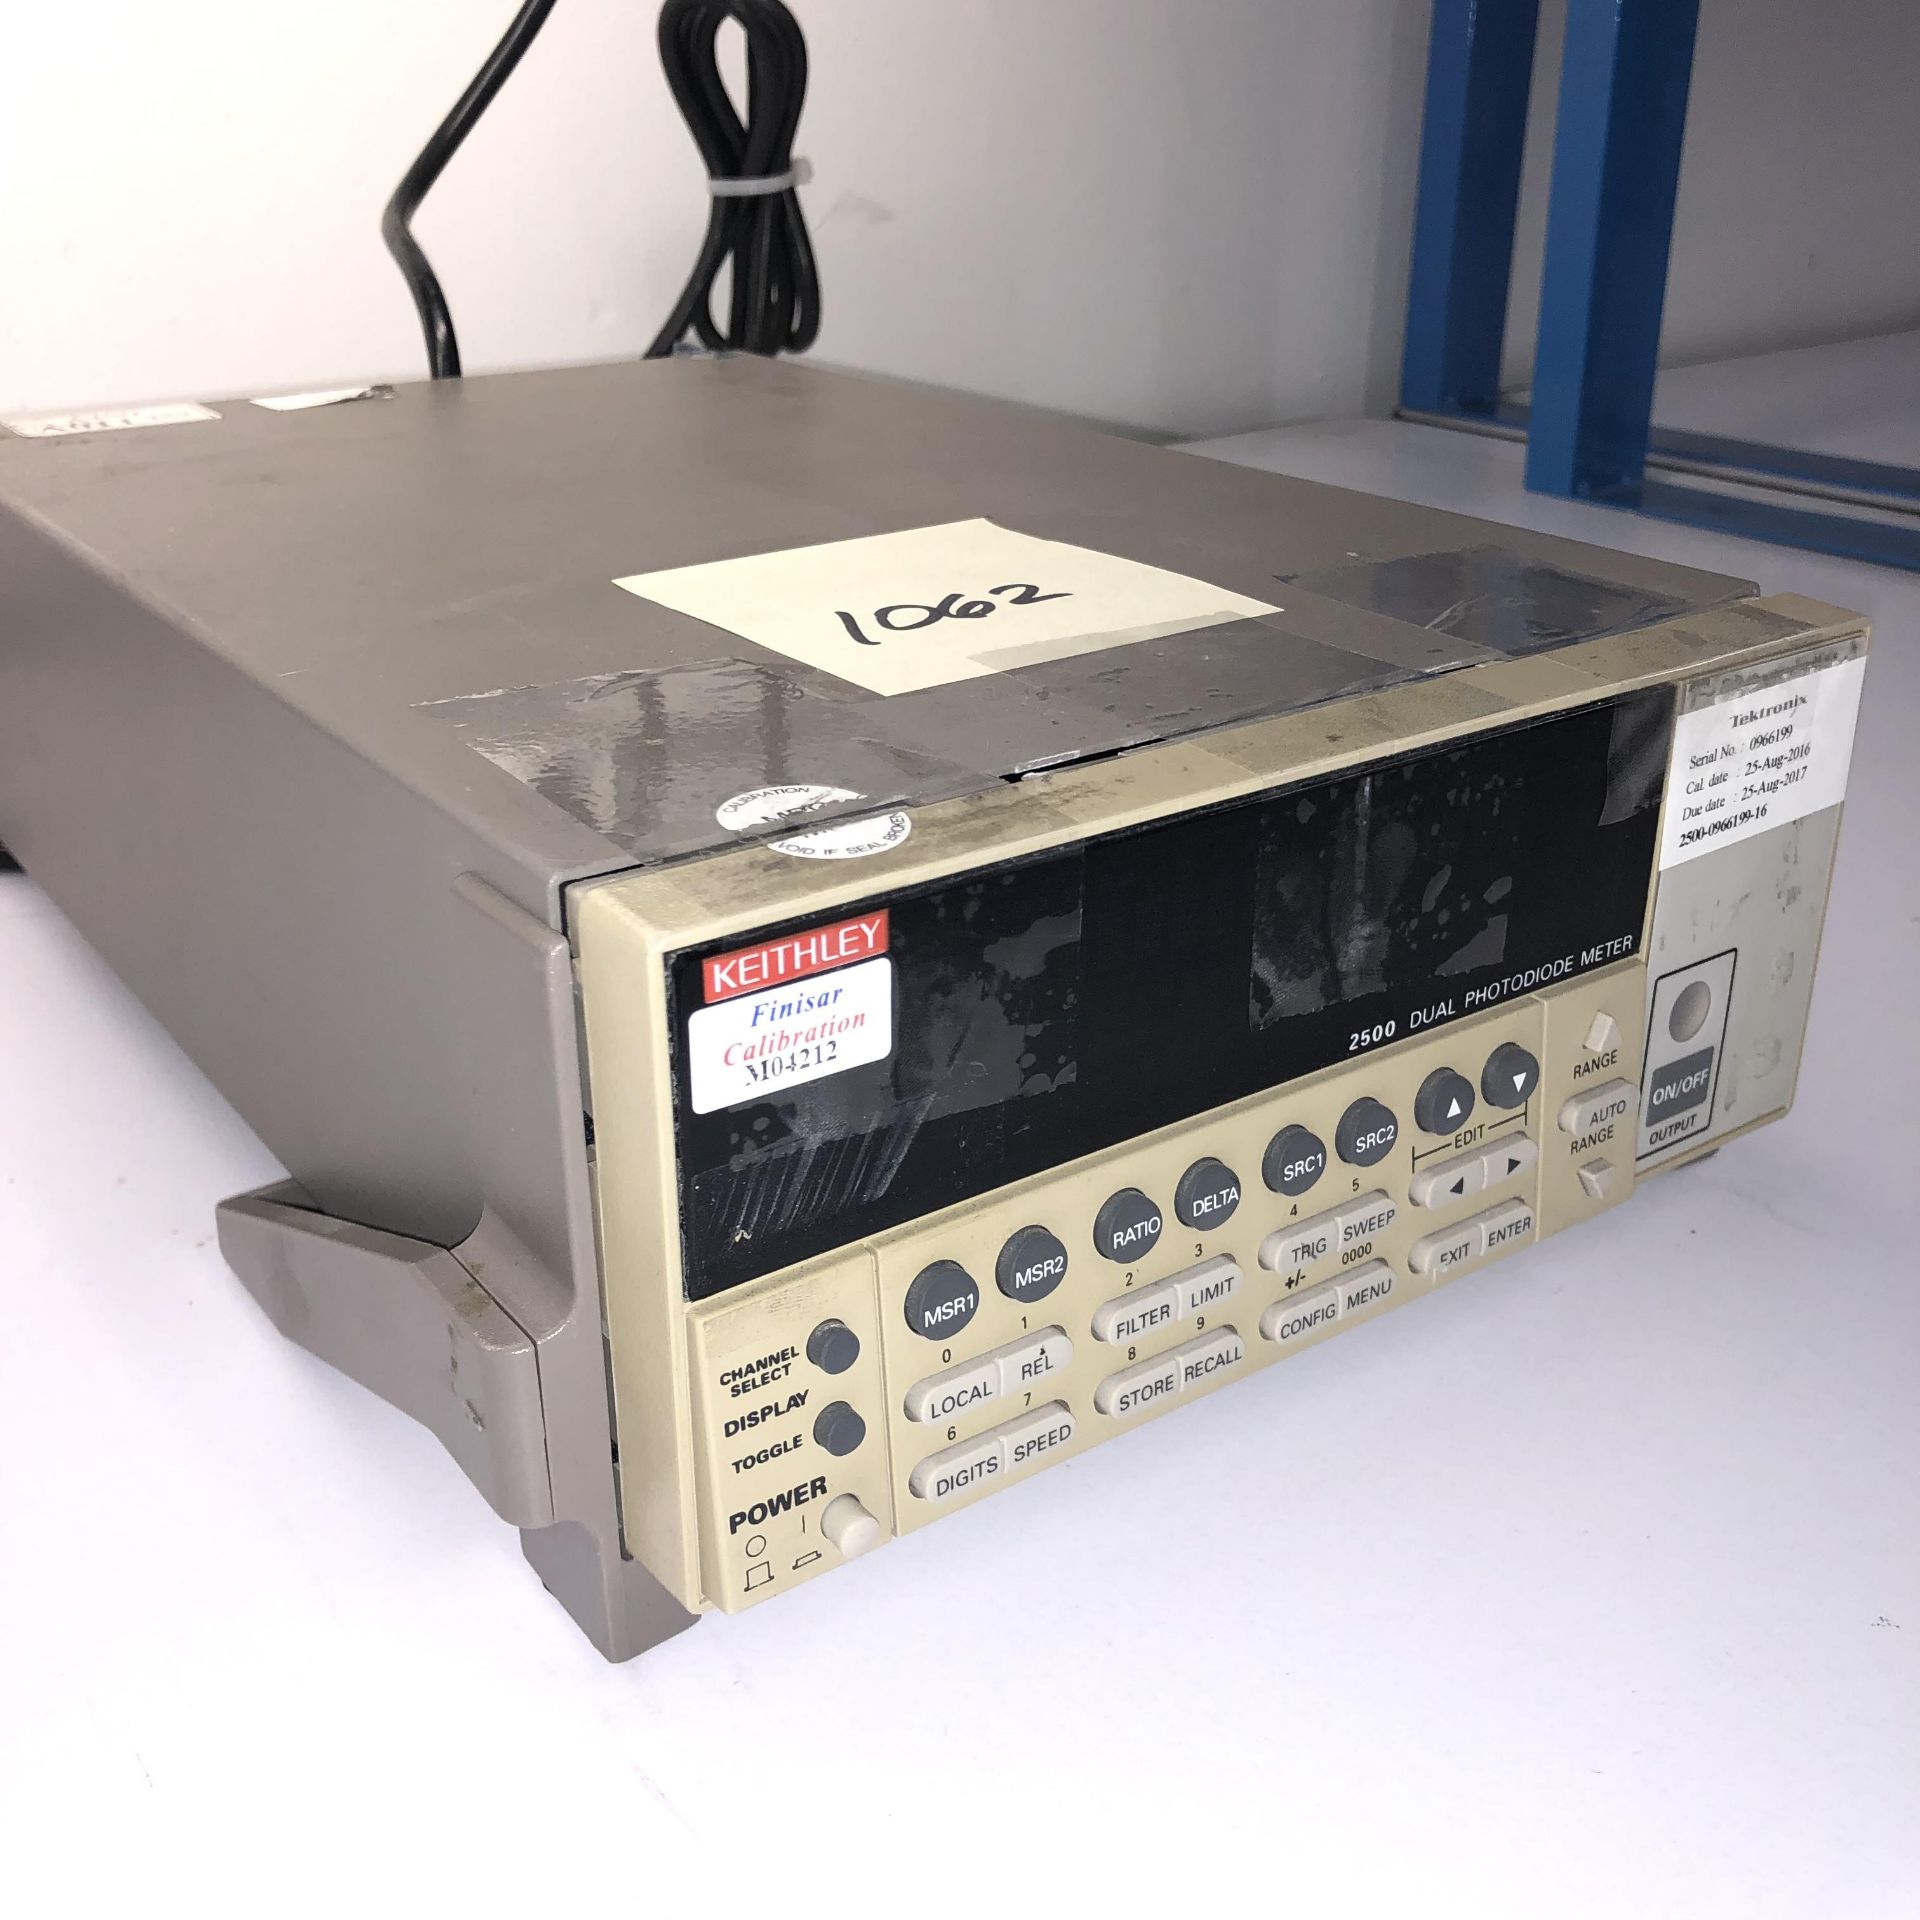 KEITHLEY 2500 DUAL PHOTODIODE METER   Cannot Power On   1218 Alderwood Ave Sunnyvale, California - Image 2 of 5